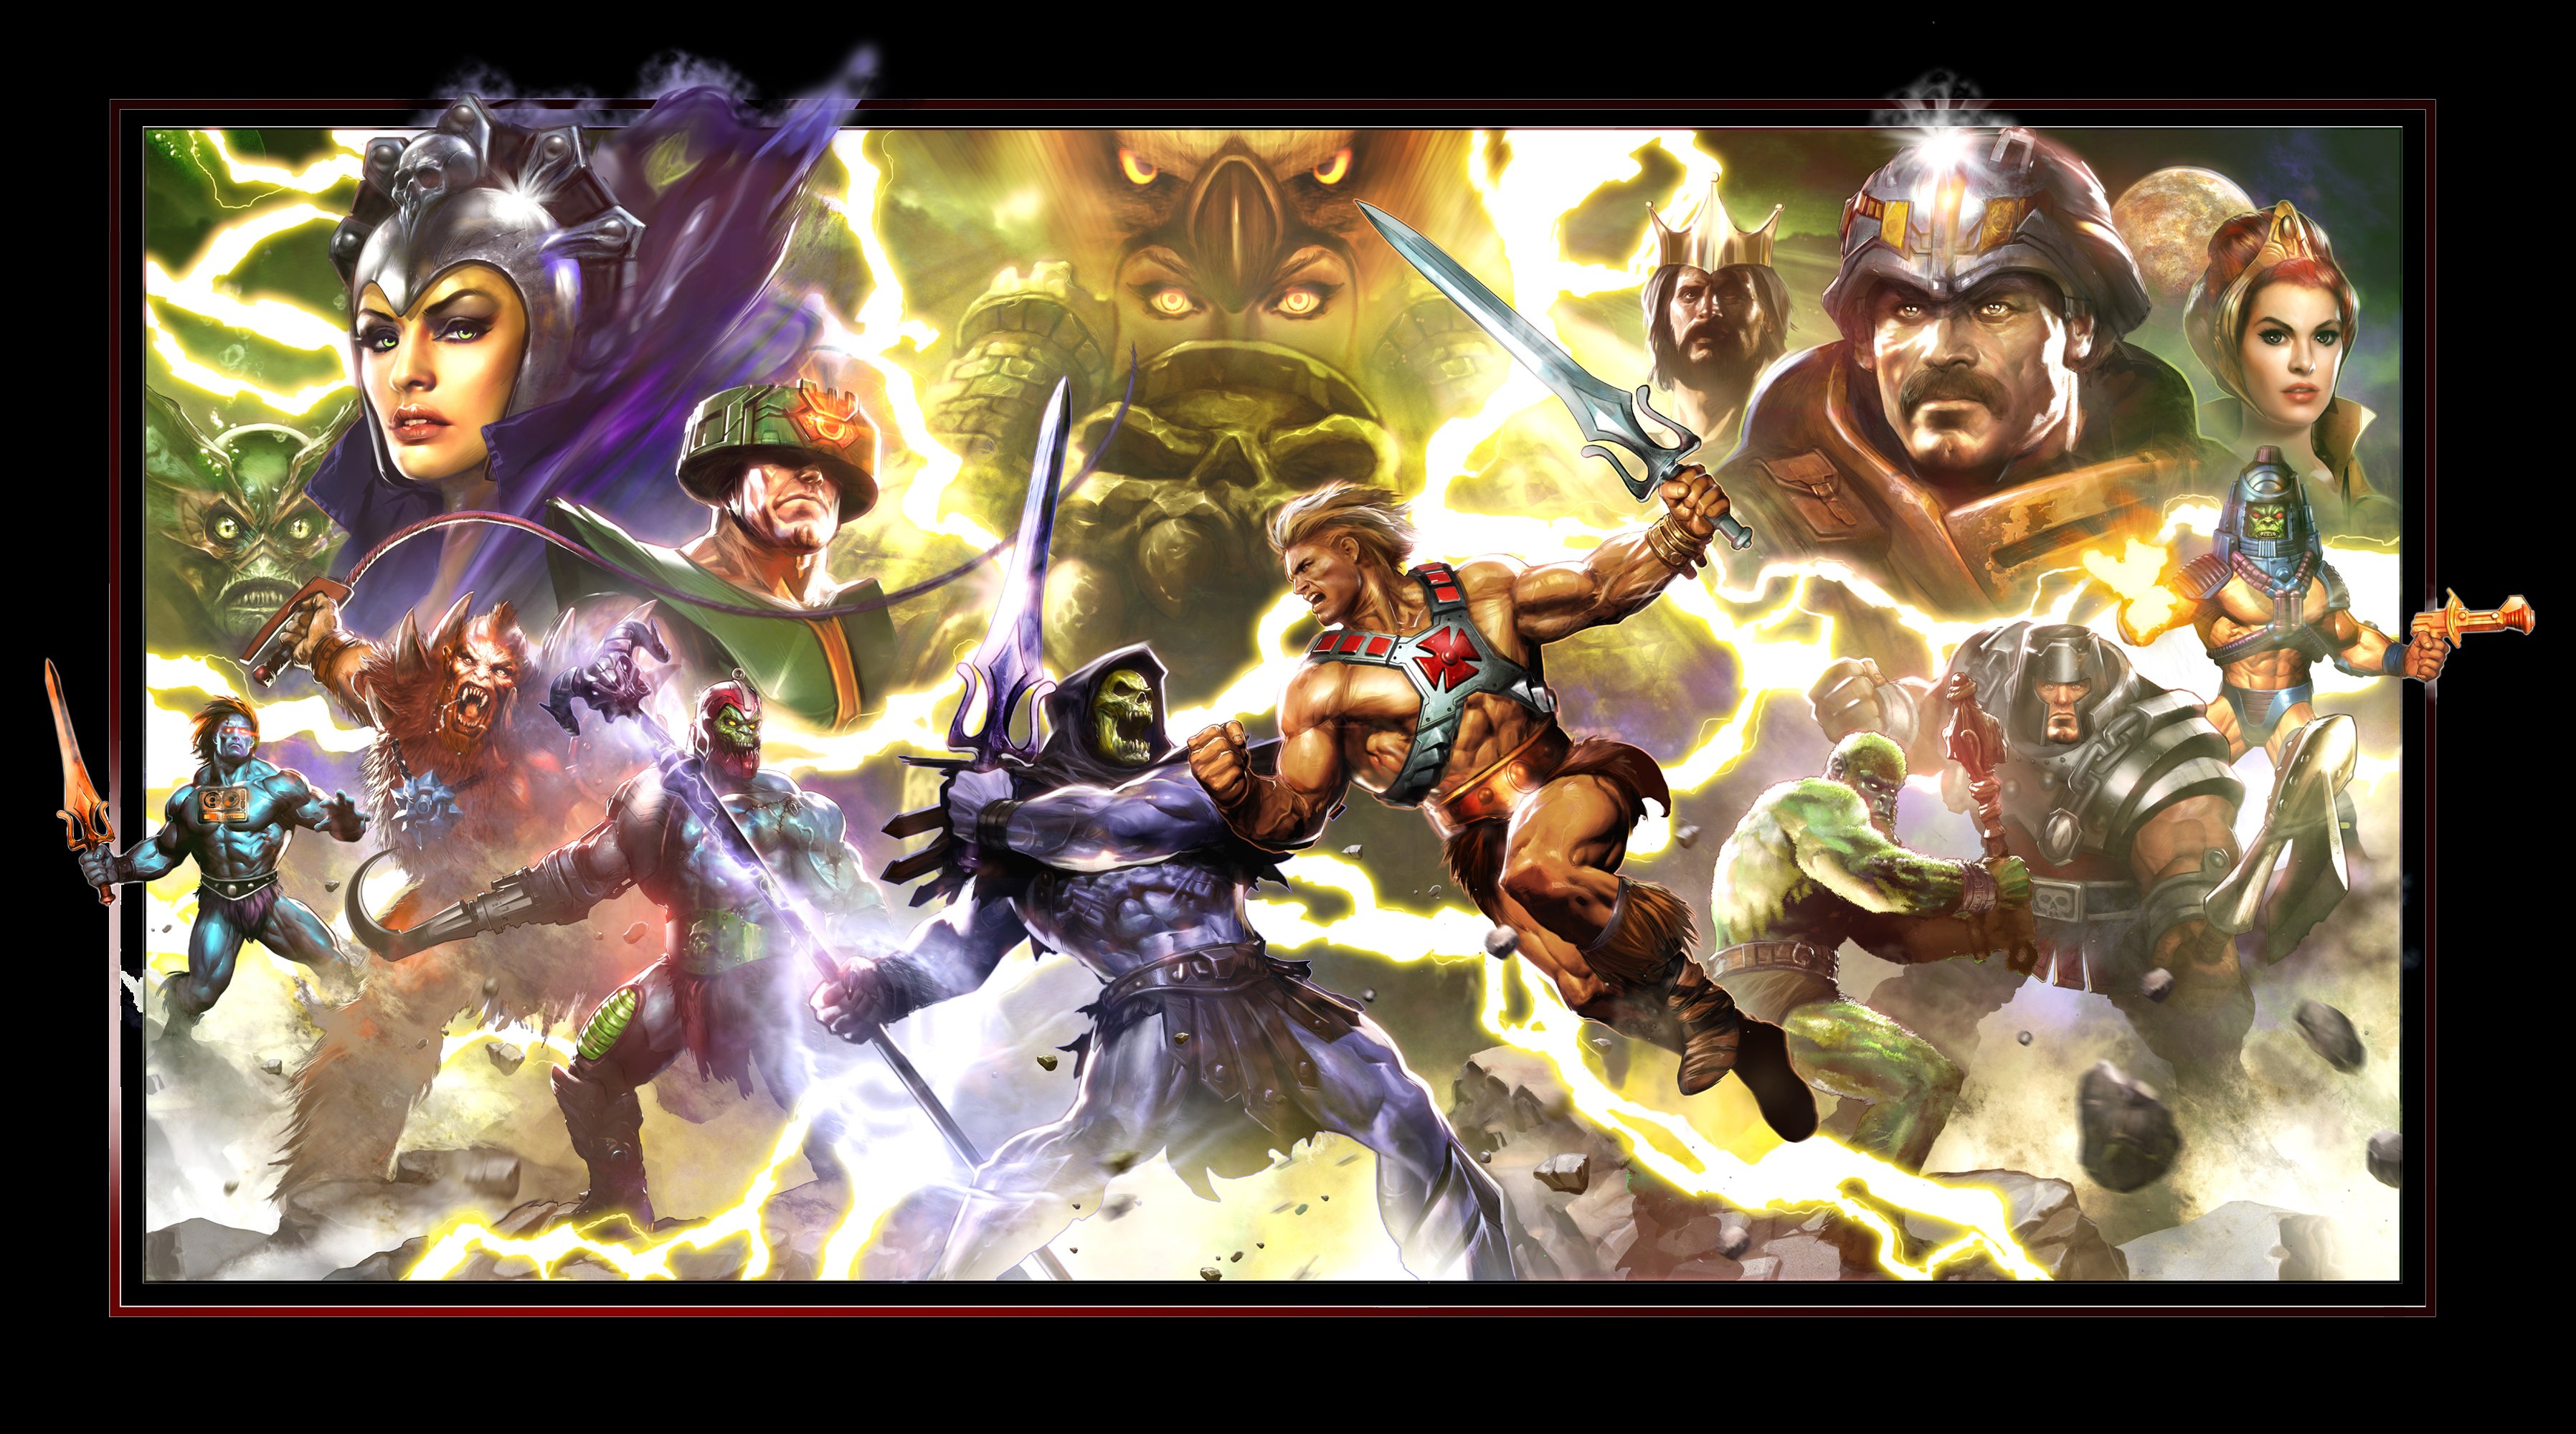 heroes, Comics, Warrior, Battle, Monster, He man, Skeletor, Evil lyn, Trap, Jaw, Ram, Man, Man at arms, She ra, He man, And, The, Masters, Of, The, Universe, Tri klops, Man e faces, Swords, Games, Fantasy Wallpaper